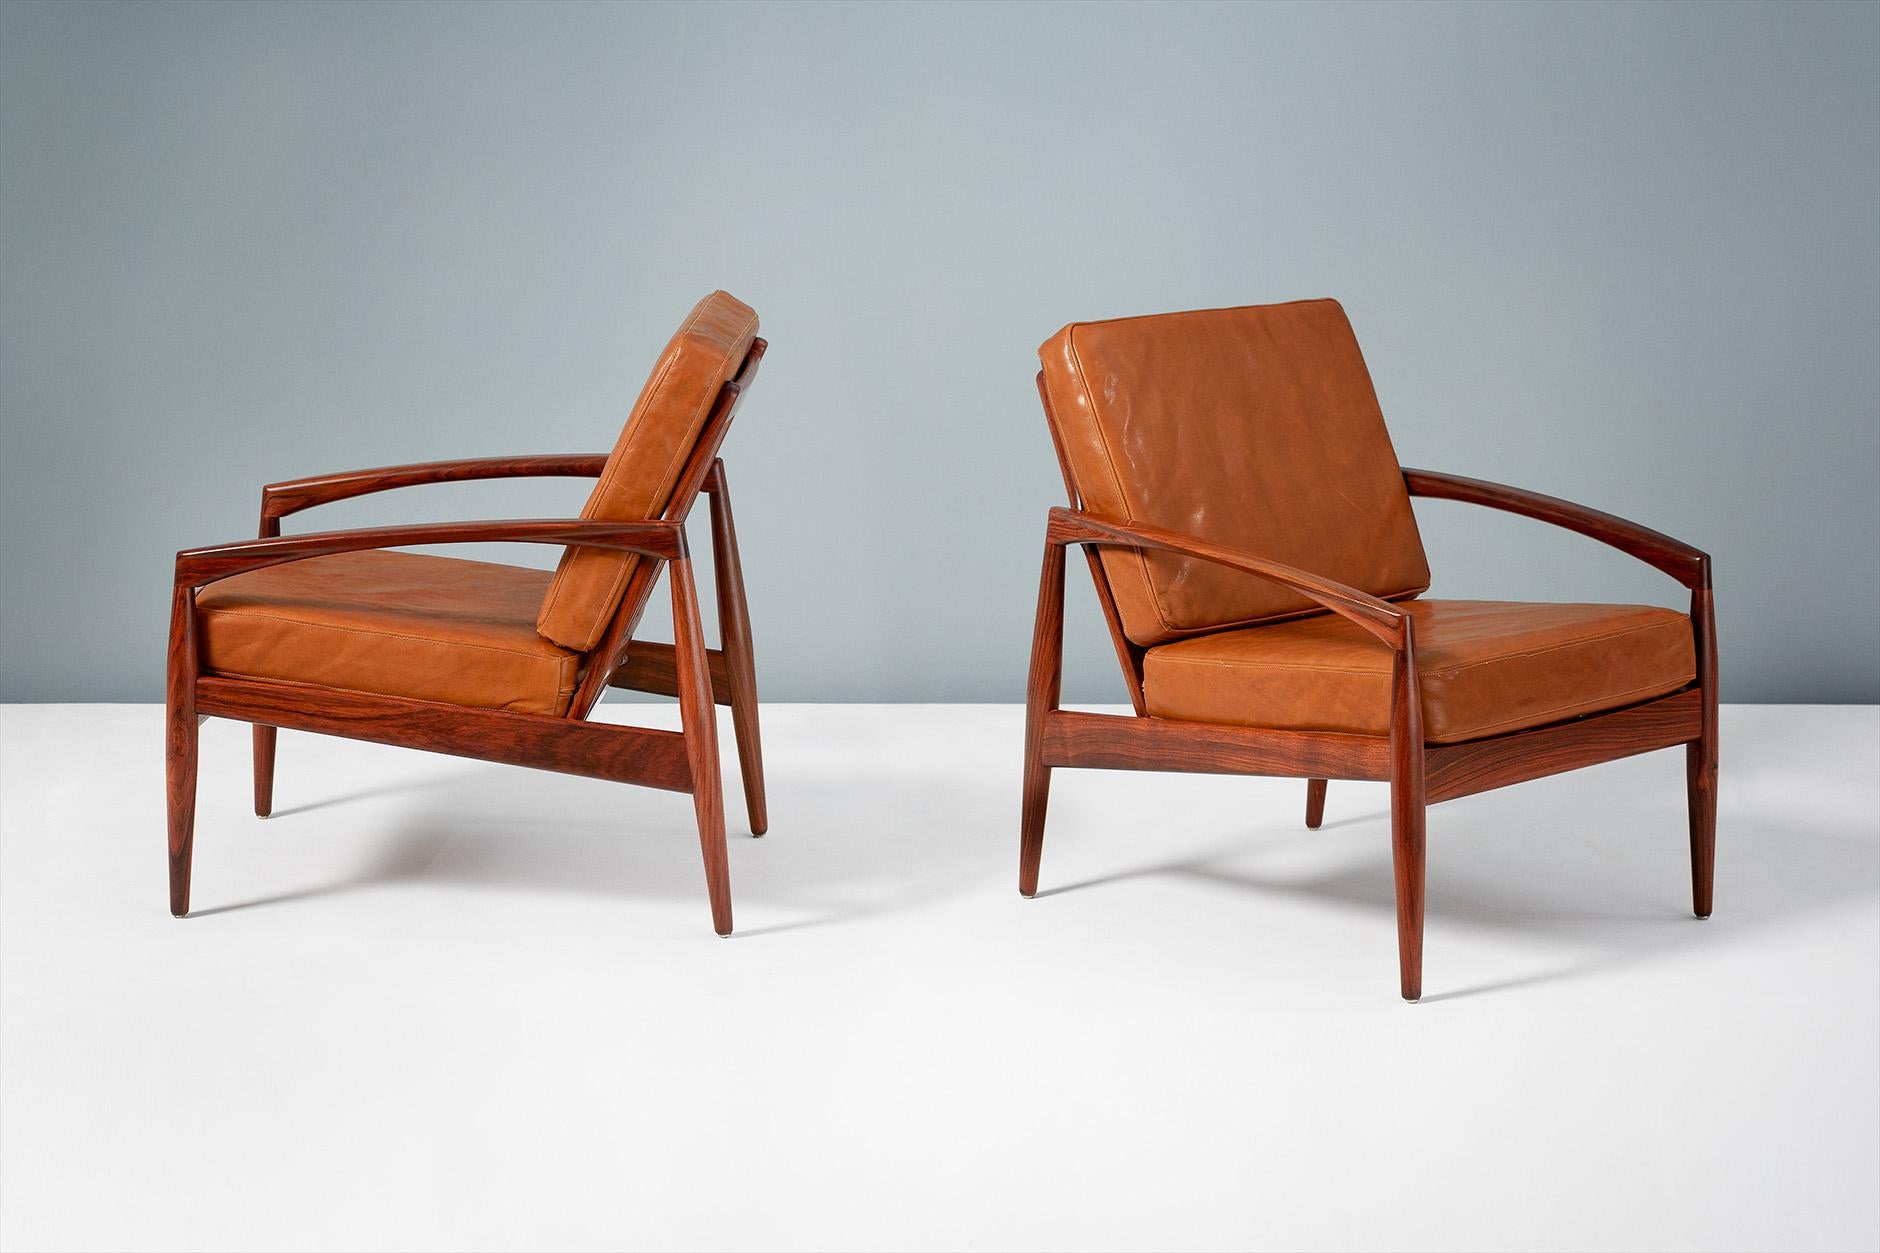 Kai Kristiansen

Model 121 paper knife lounge chairs, 1955

Pair of lounge chairs produced by Magnus Olesen, Denmark in rosewood. New cushions upholstered in premium cognac brown aniline leather. 

Measures: W 64cm, D 70cm, H 70cm

Other